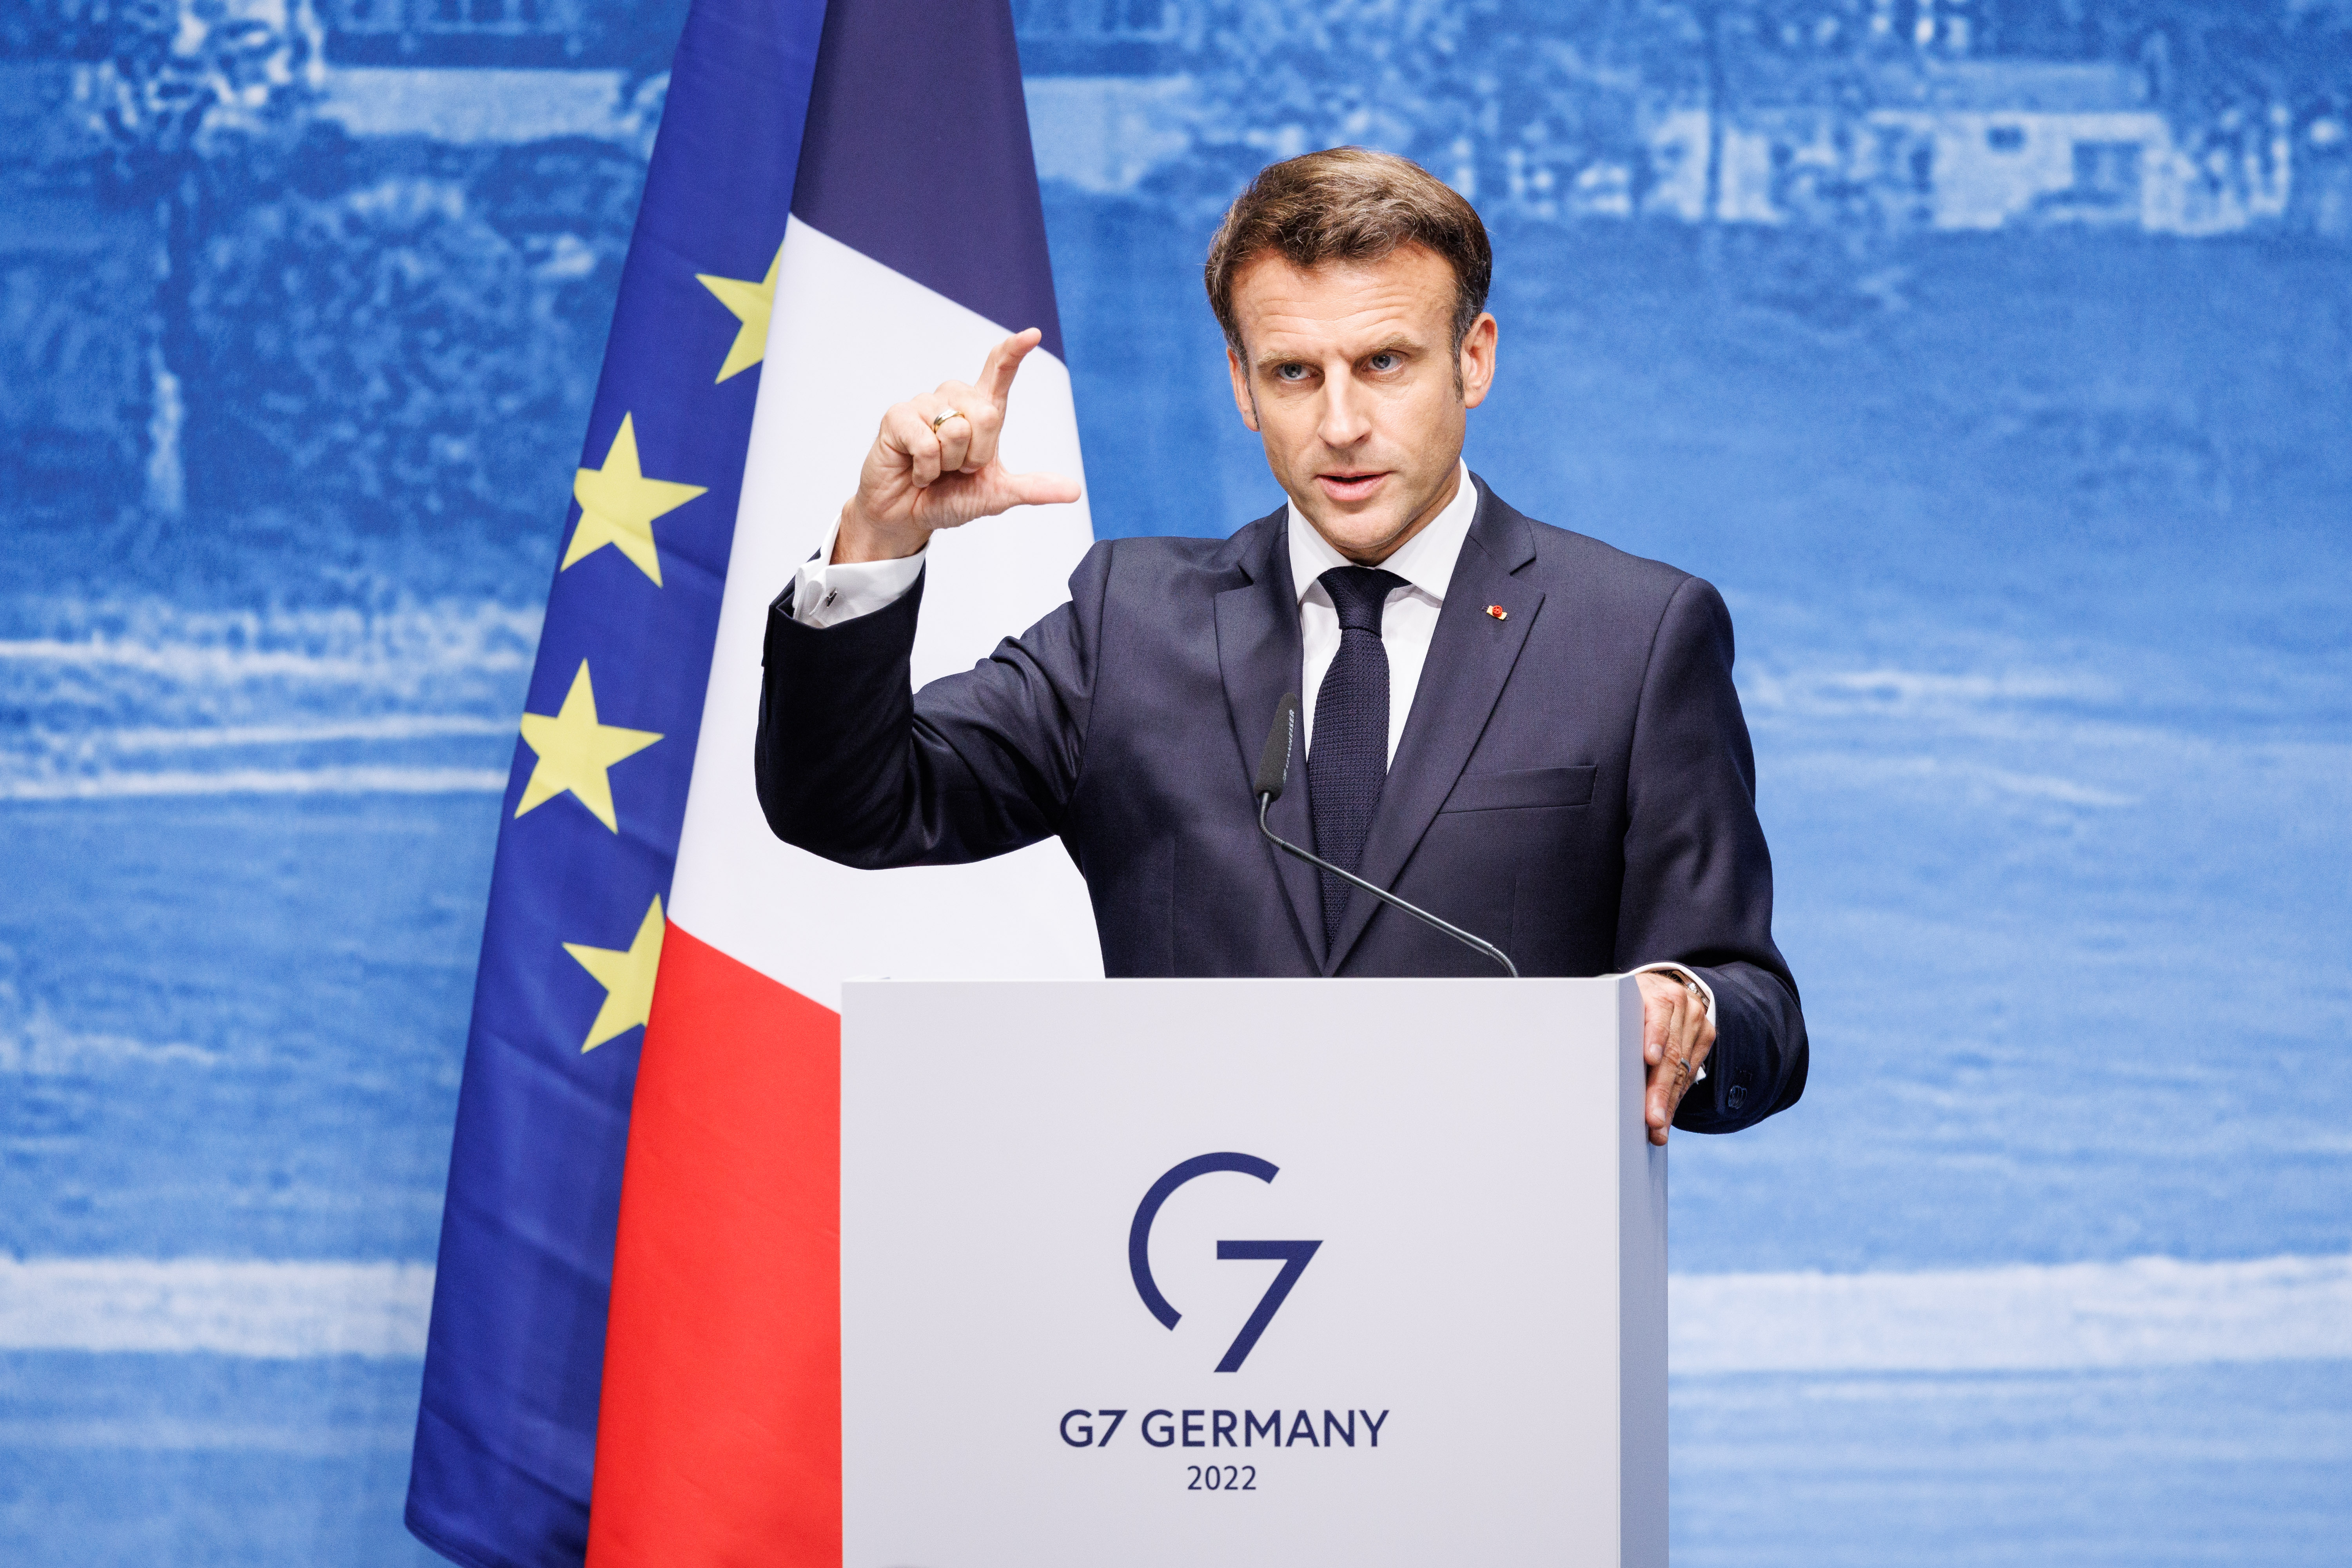 French President Emmanuel Macron gives a press conference at the end of the G7 summit.